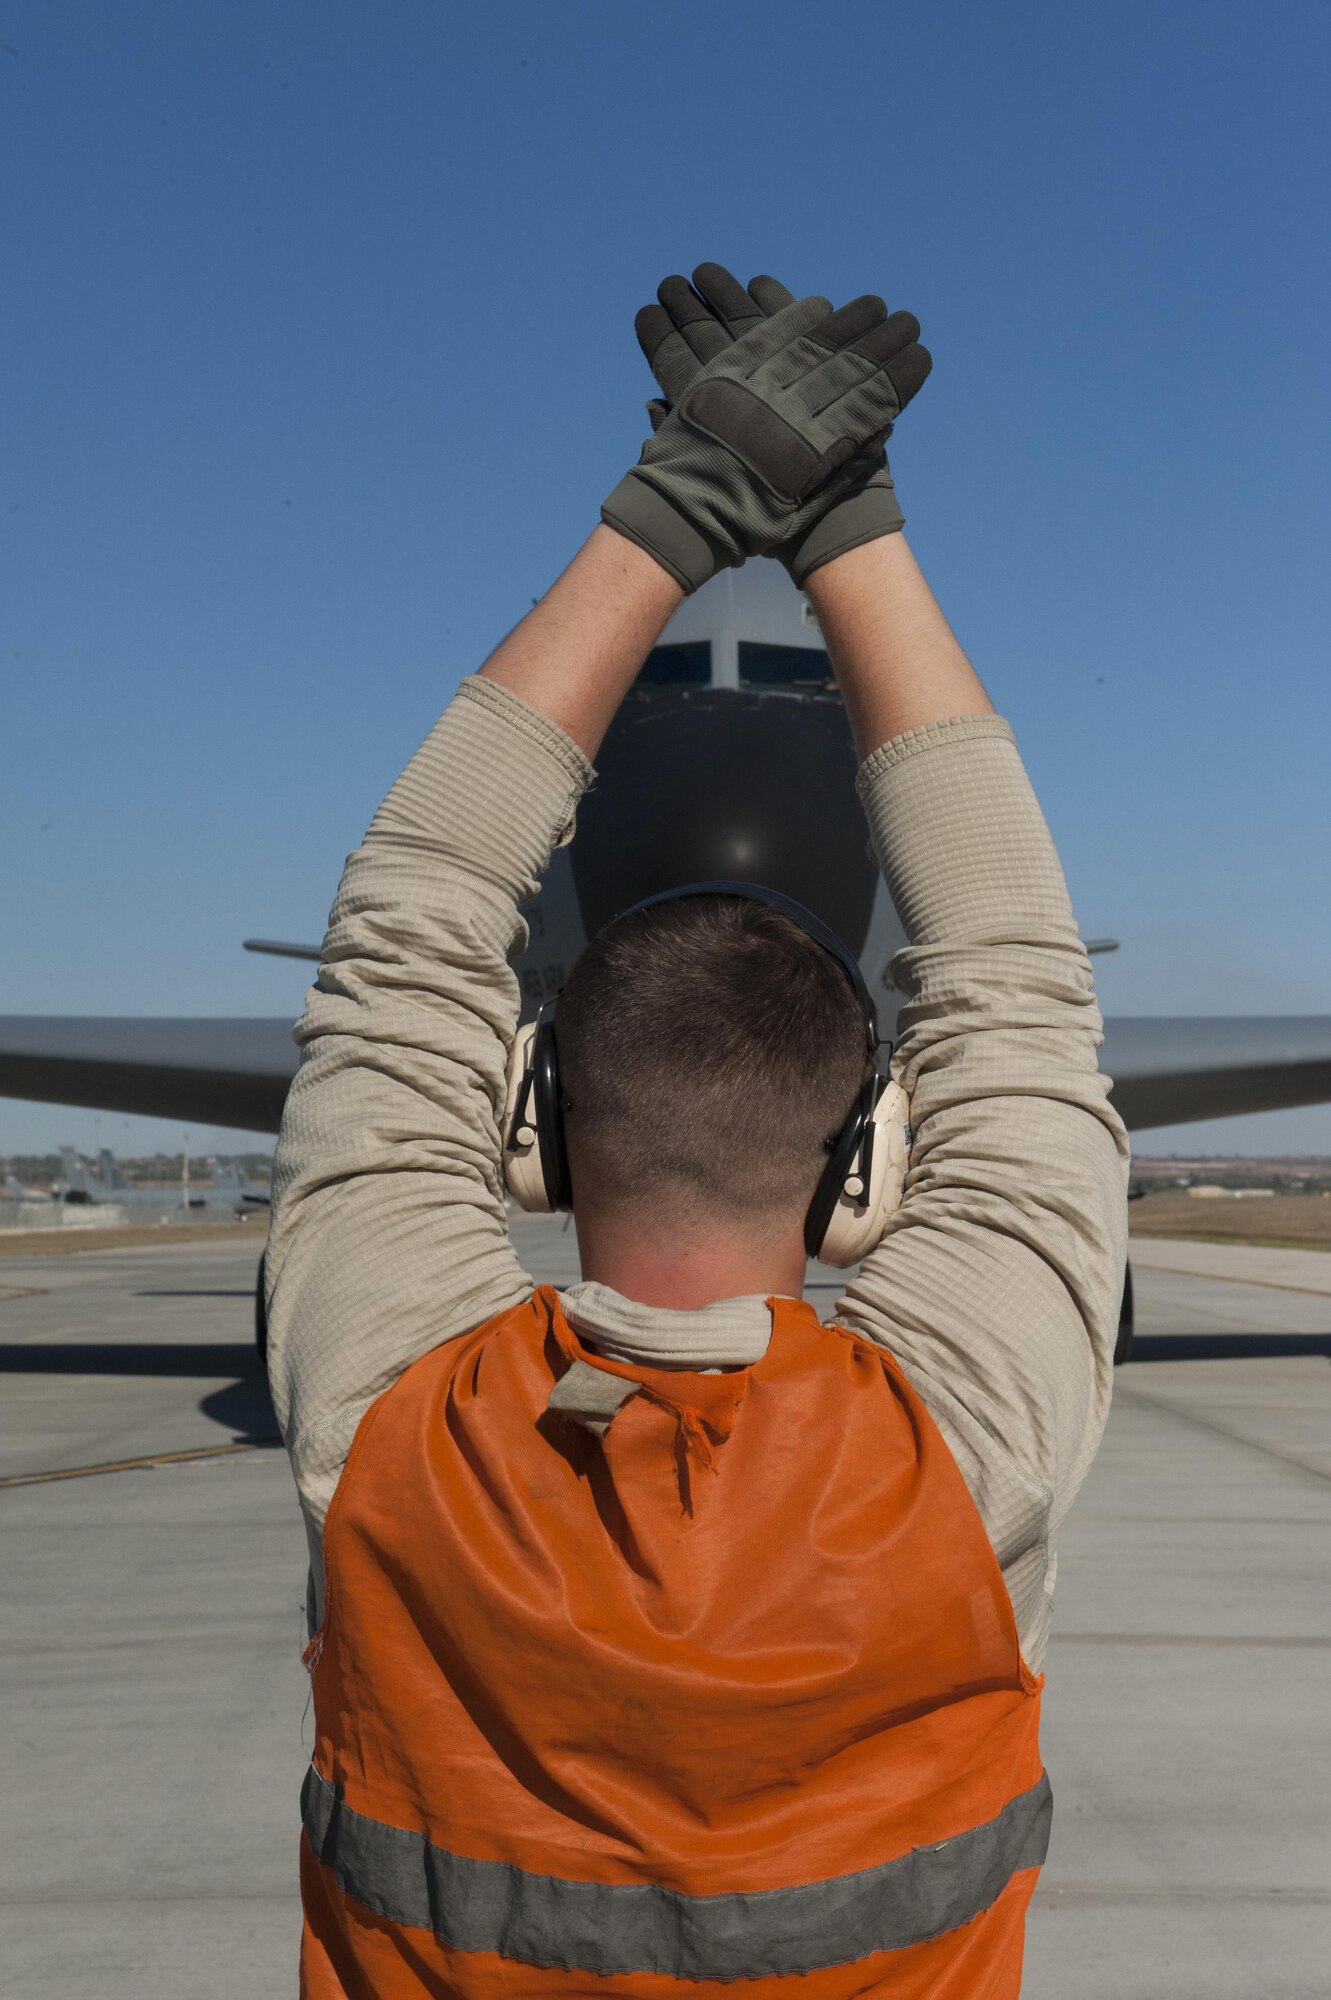 U.S. Air Force Airman 1st Class Nathaniel, 447th Expeditionary Aircraft Maintenance Squadron crew chief, marshals a KC-135 Stratotanker Nov. 2, 2016, at Incirlik Air Base, Turkey. Stratotankers provide a critical role in Operation INHERENT RESOLVE by refueling coalition forces aircraft. (U.S. Air Force photo by Staff Sgt. Jack Sanders)